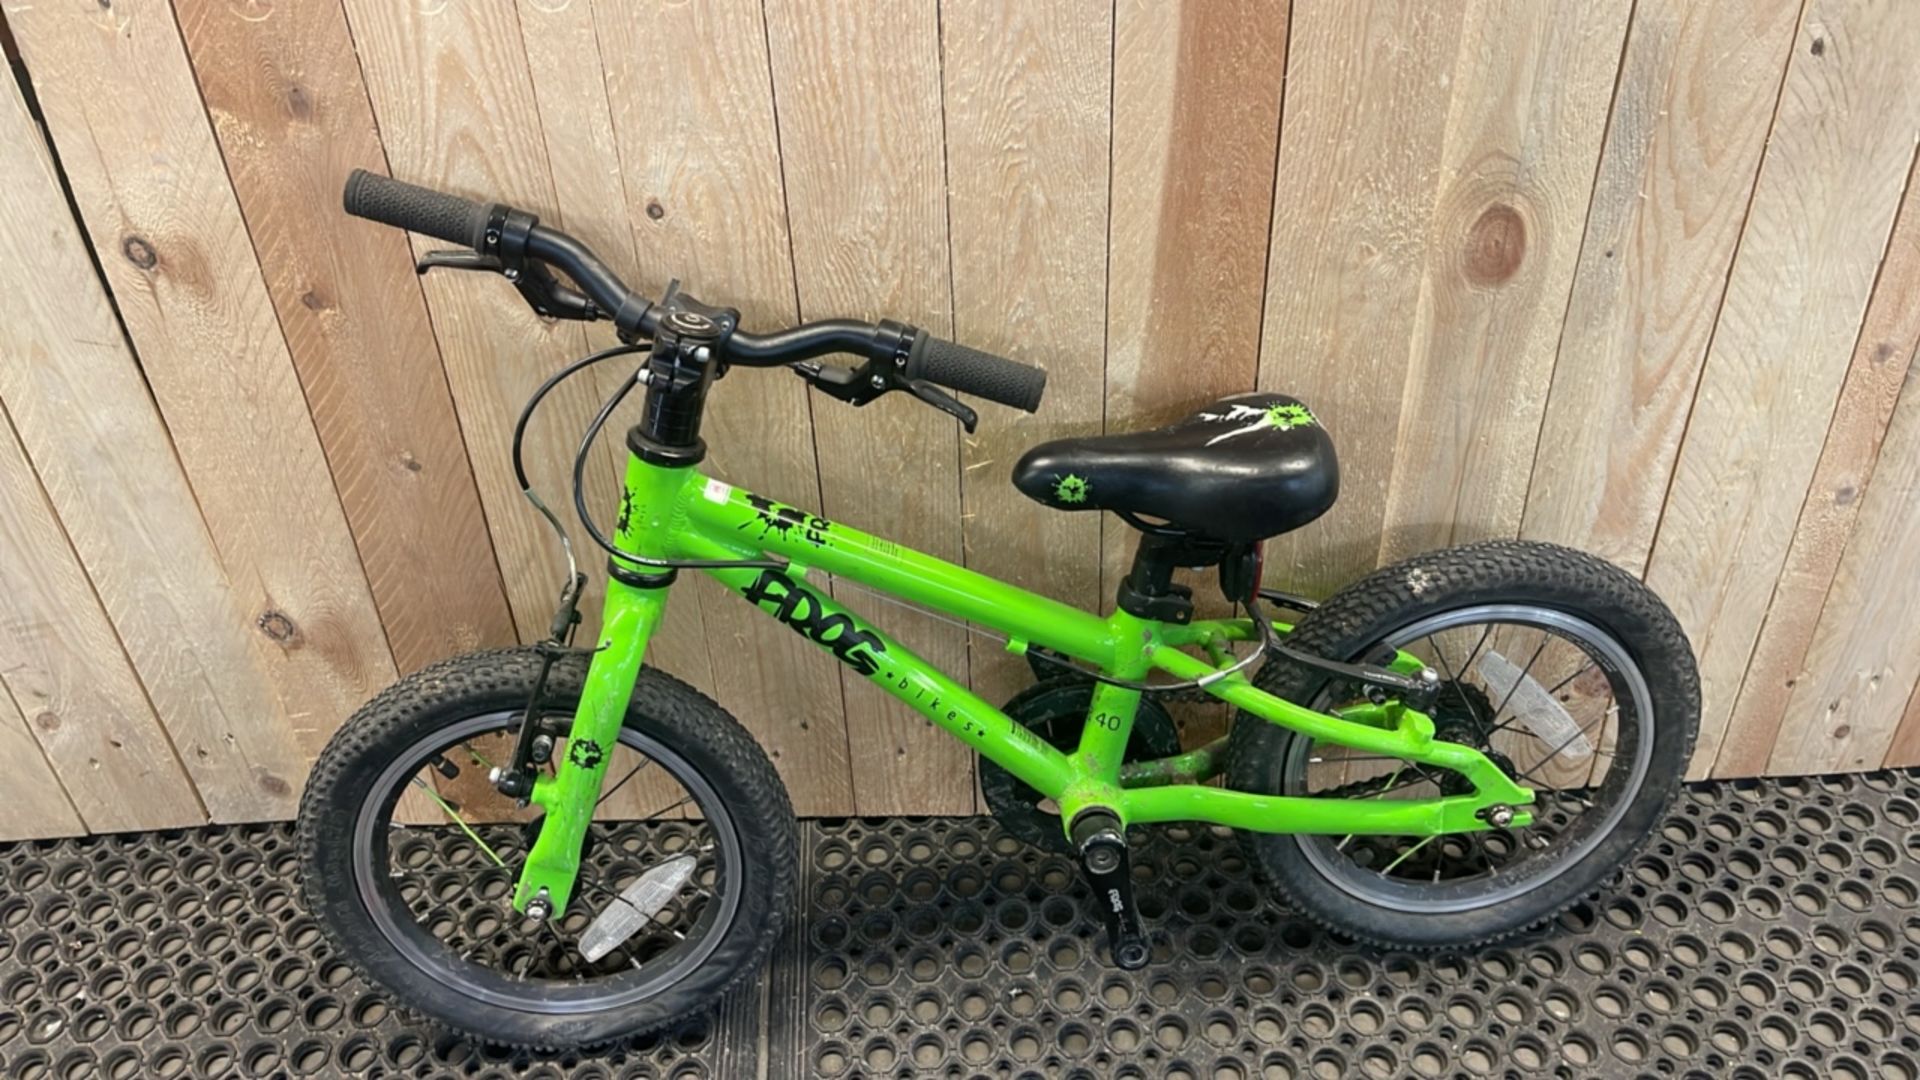 Age 3 to 4 years Frog 40 Bike - Image 8 of 11